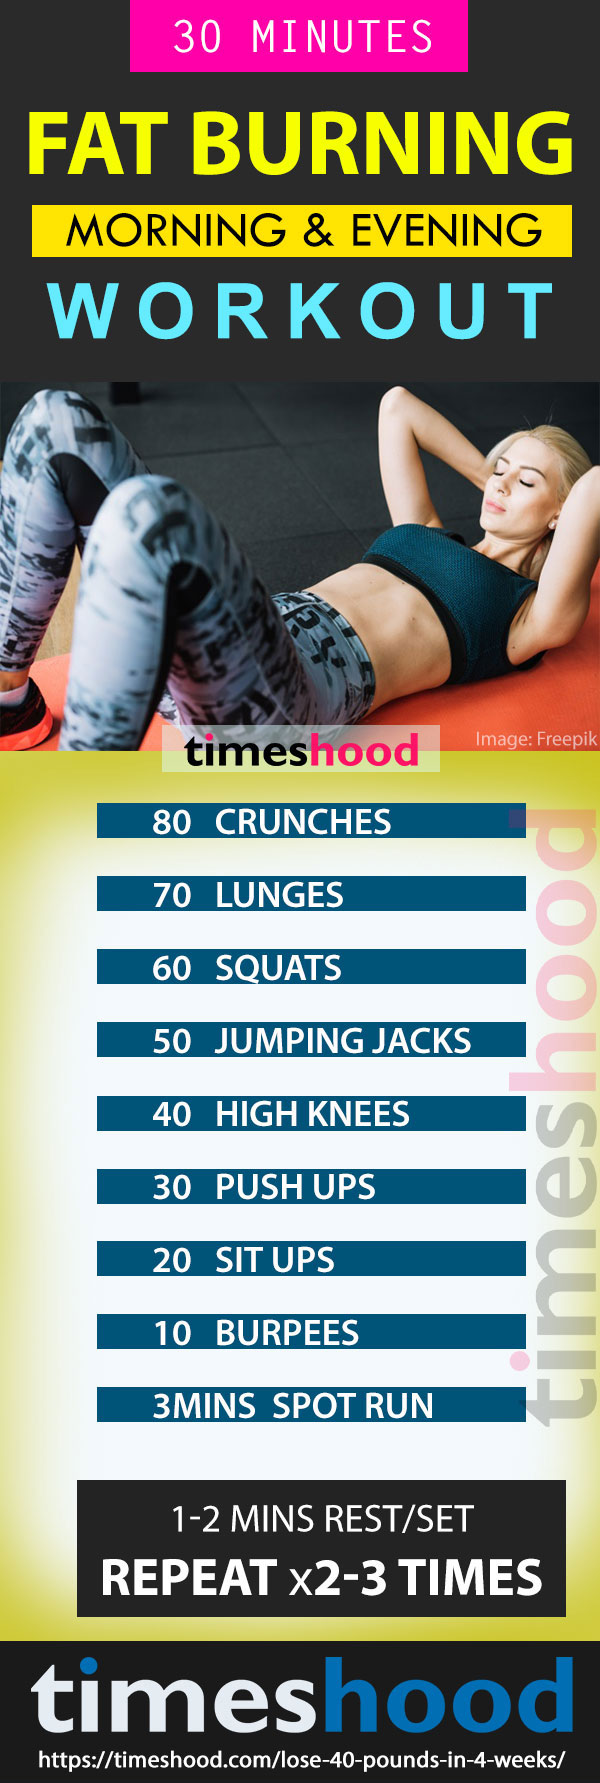 Fat Burning Workout: Morning Workout Plan for Weight loss. Best fat burning exercise for fast weight loss. HIIT Workout challenge. Lose up to 40 pounds in 4 weeks complete 24 hours weight loss guide to follow. Fastest way to lose weight in 4 weeks. 4 Week flat belly challenge to lose up to 40 pounds visit timeshood.com